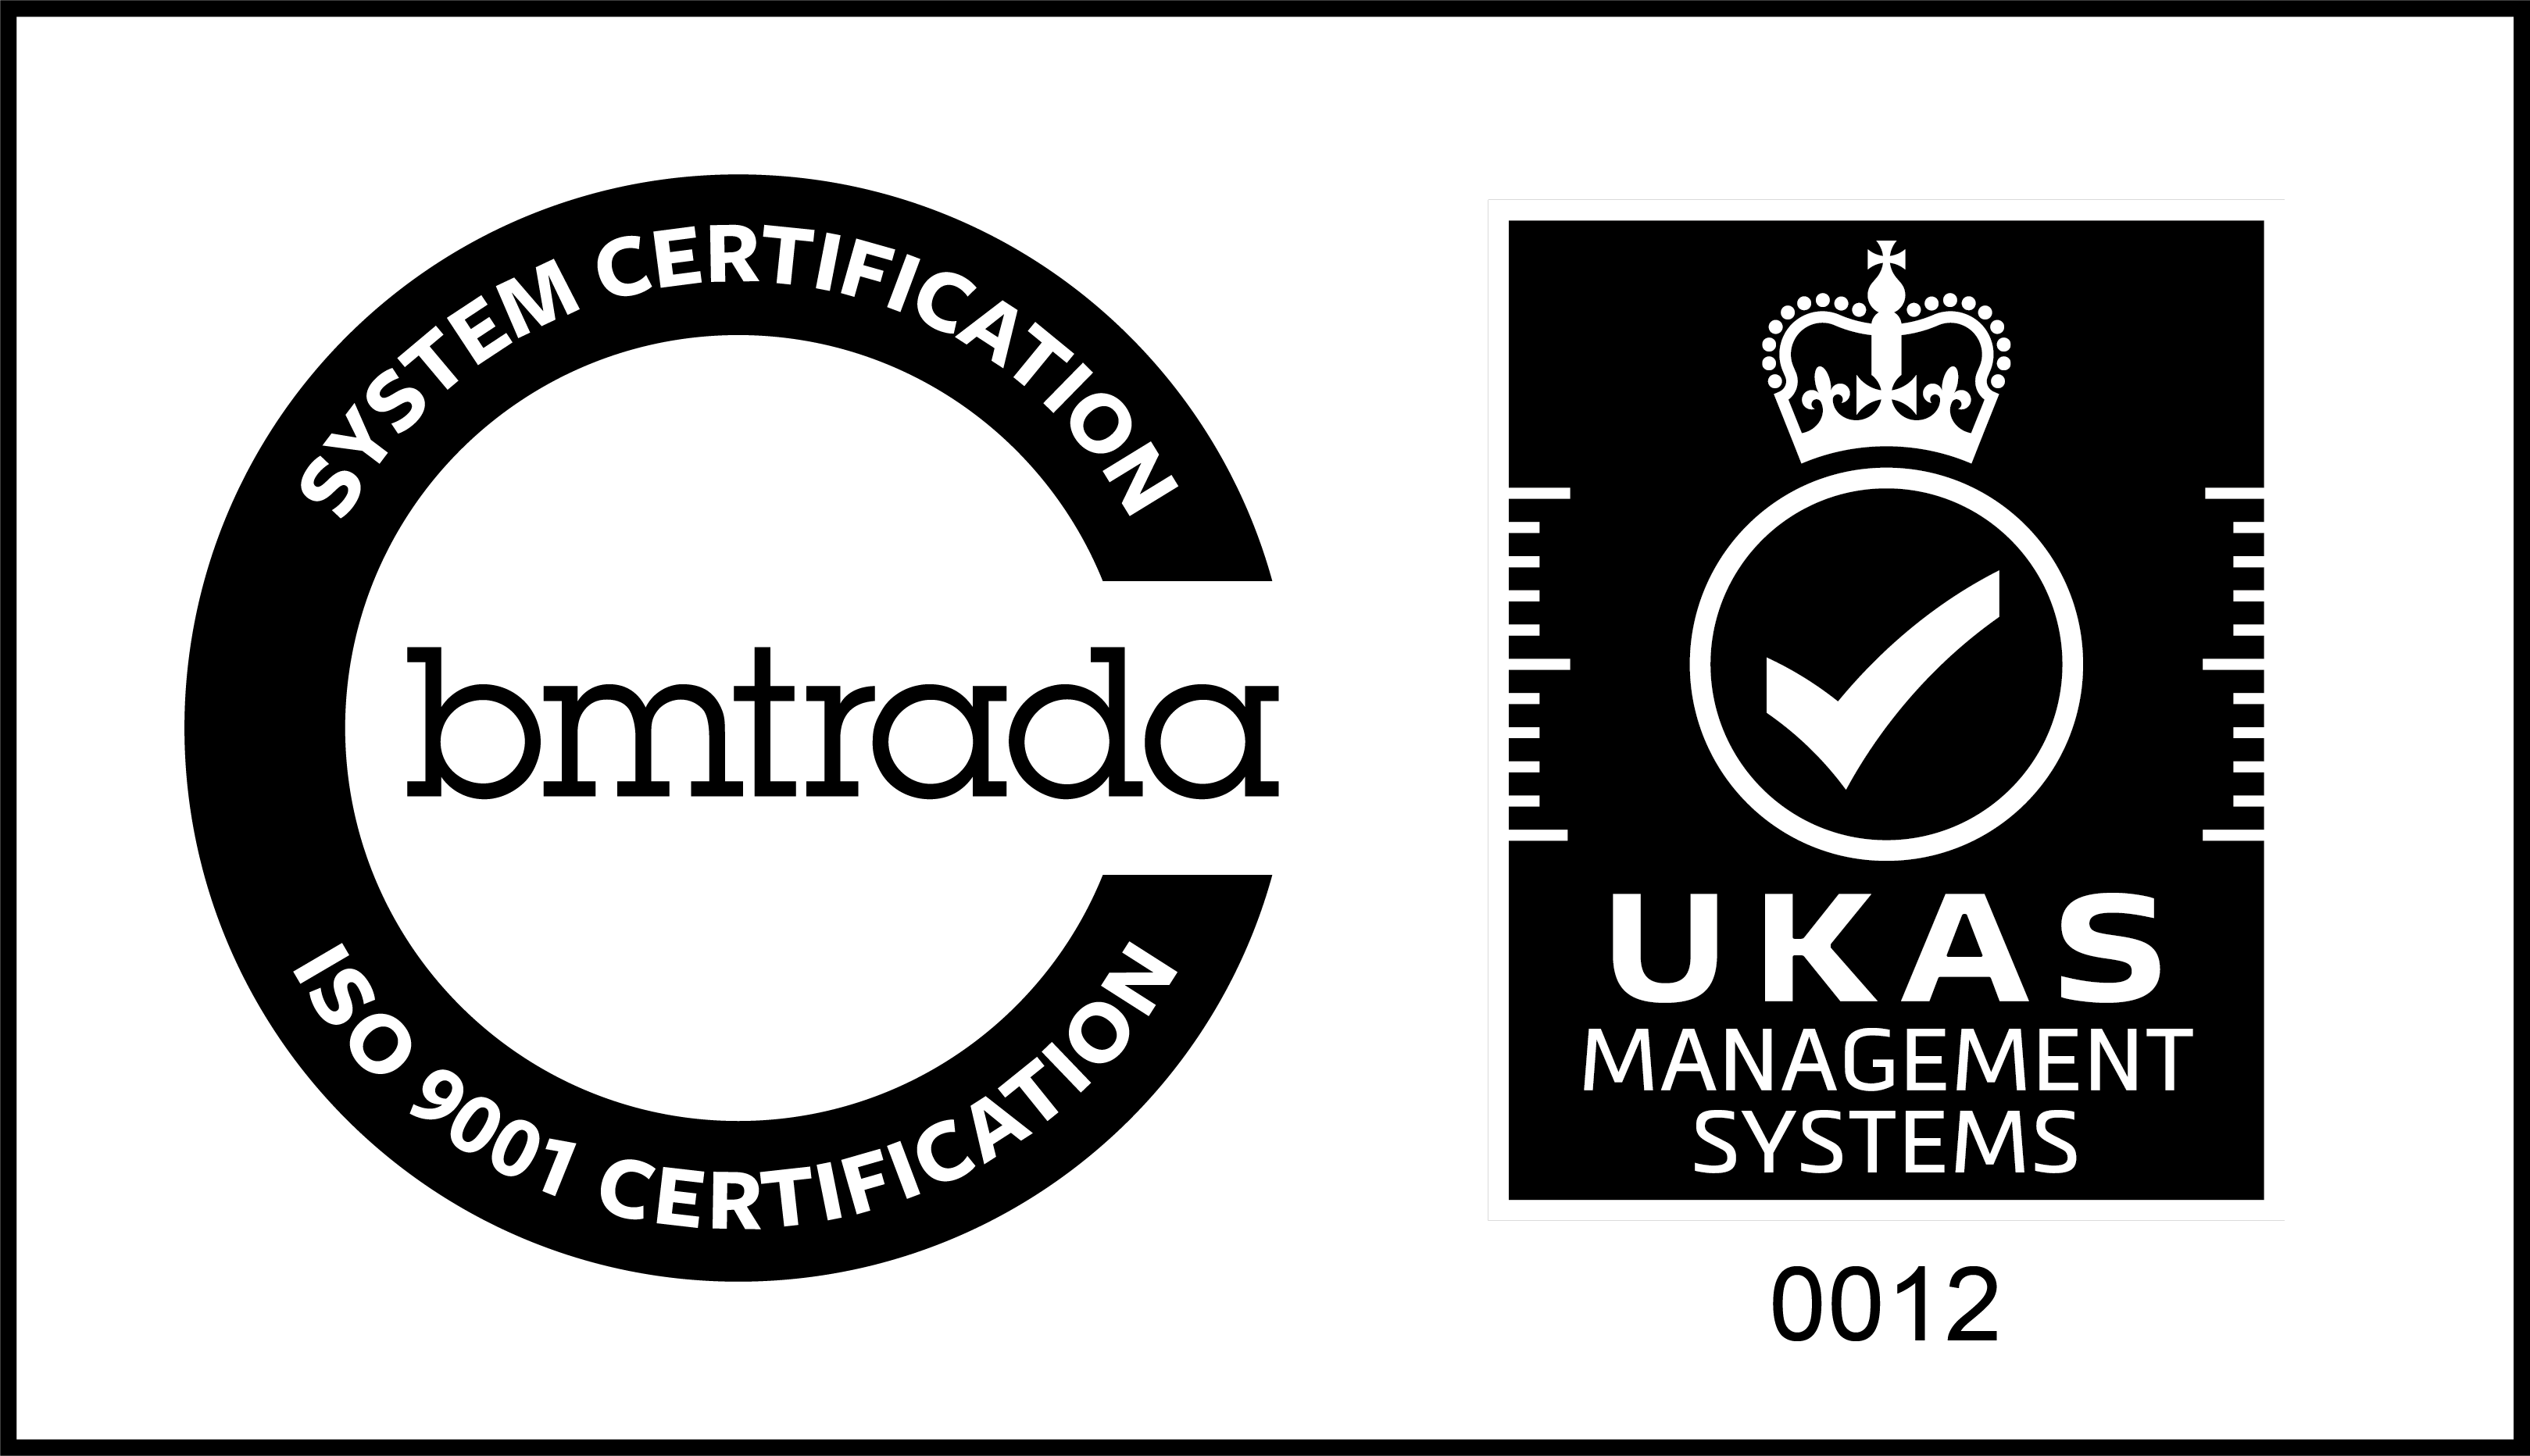 SYSTEM CERTIFICATION bmtrada ISO 9001 CERTIFICATION UKAS MANAGEMENT SYSTEMS 012